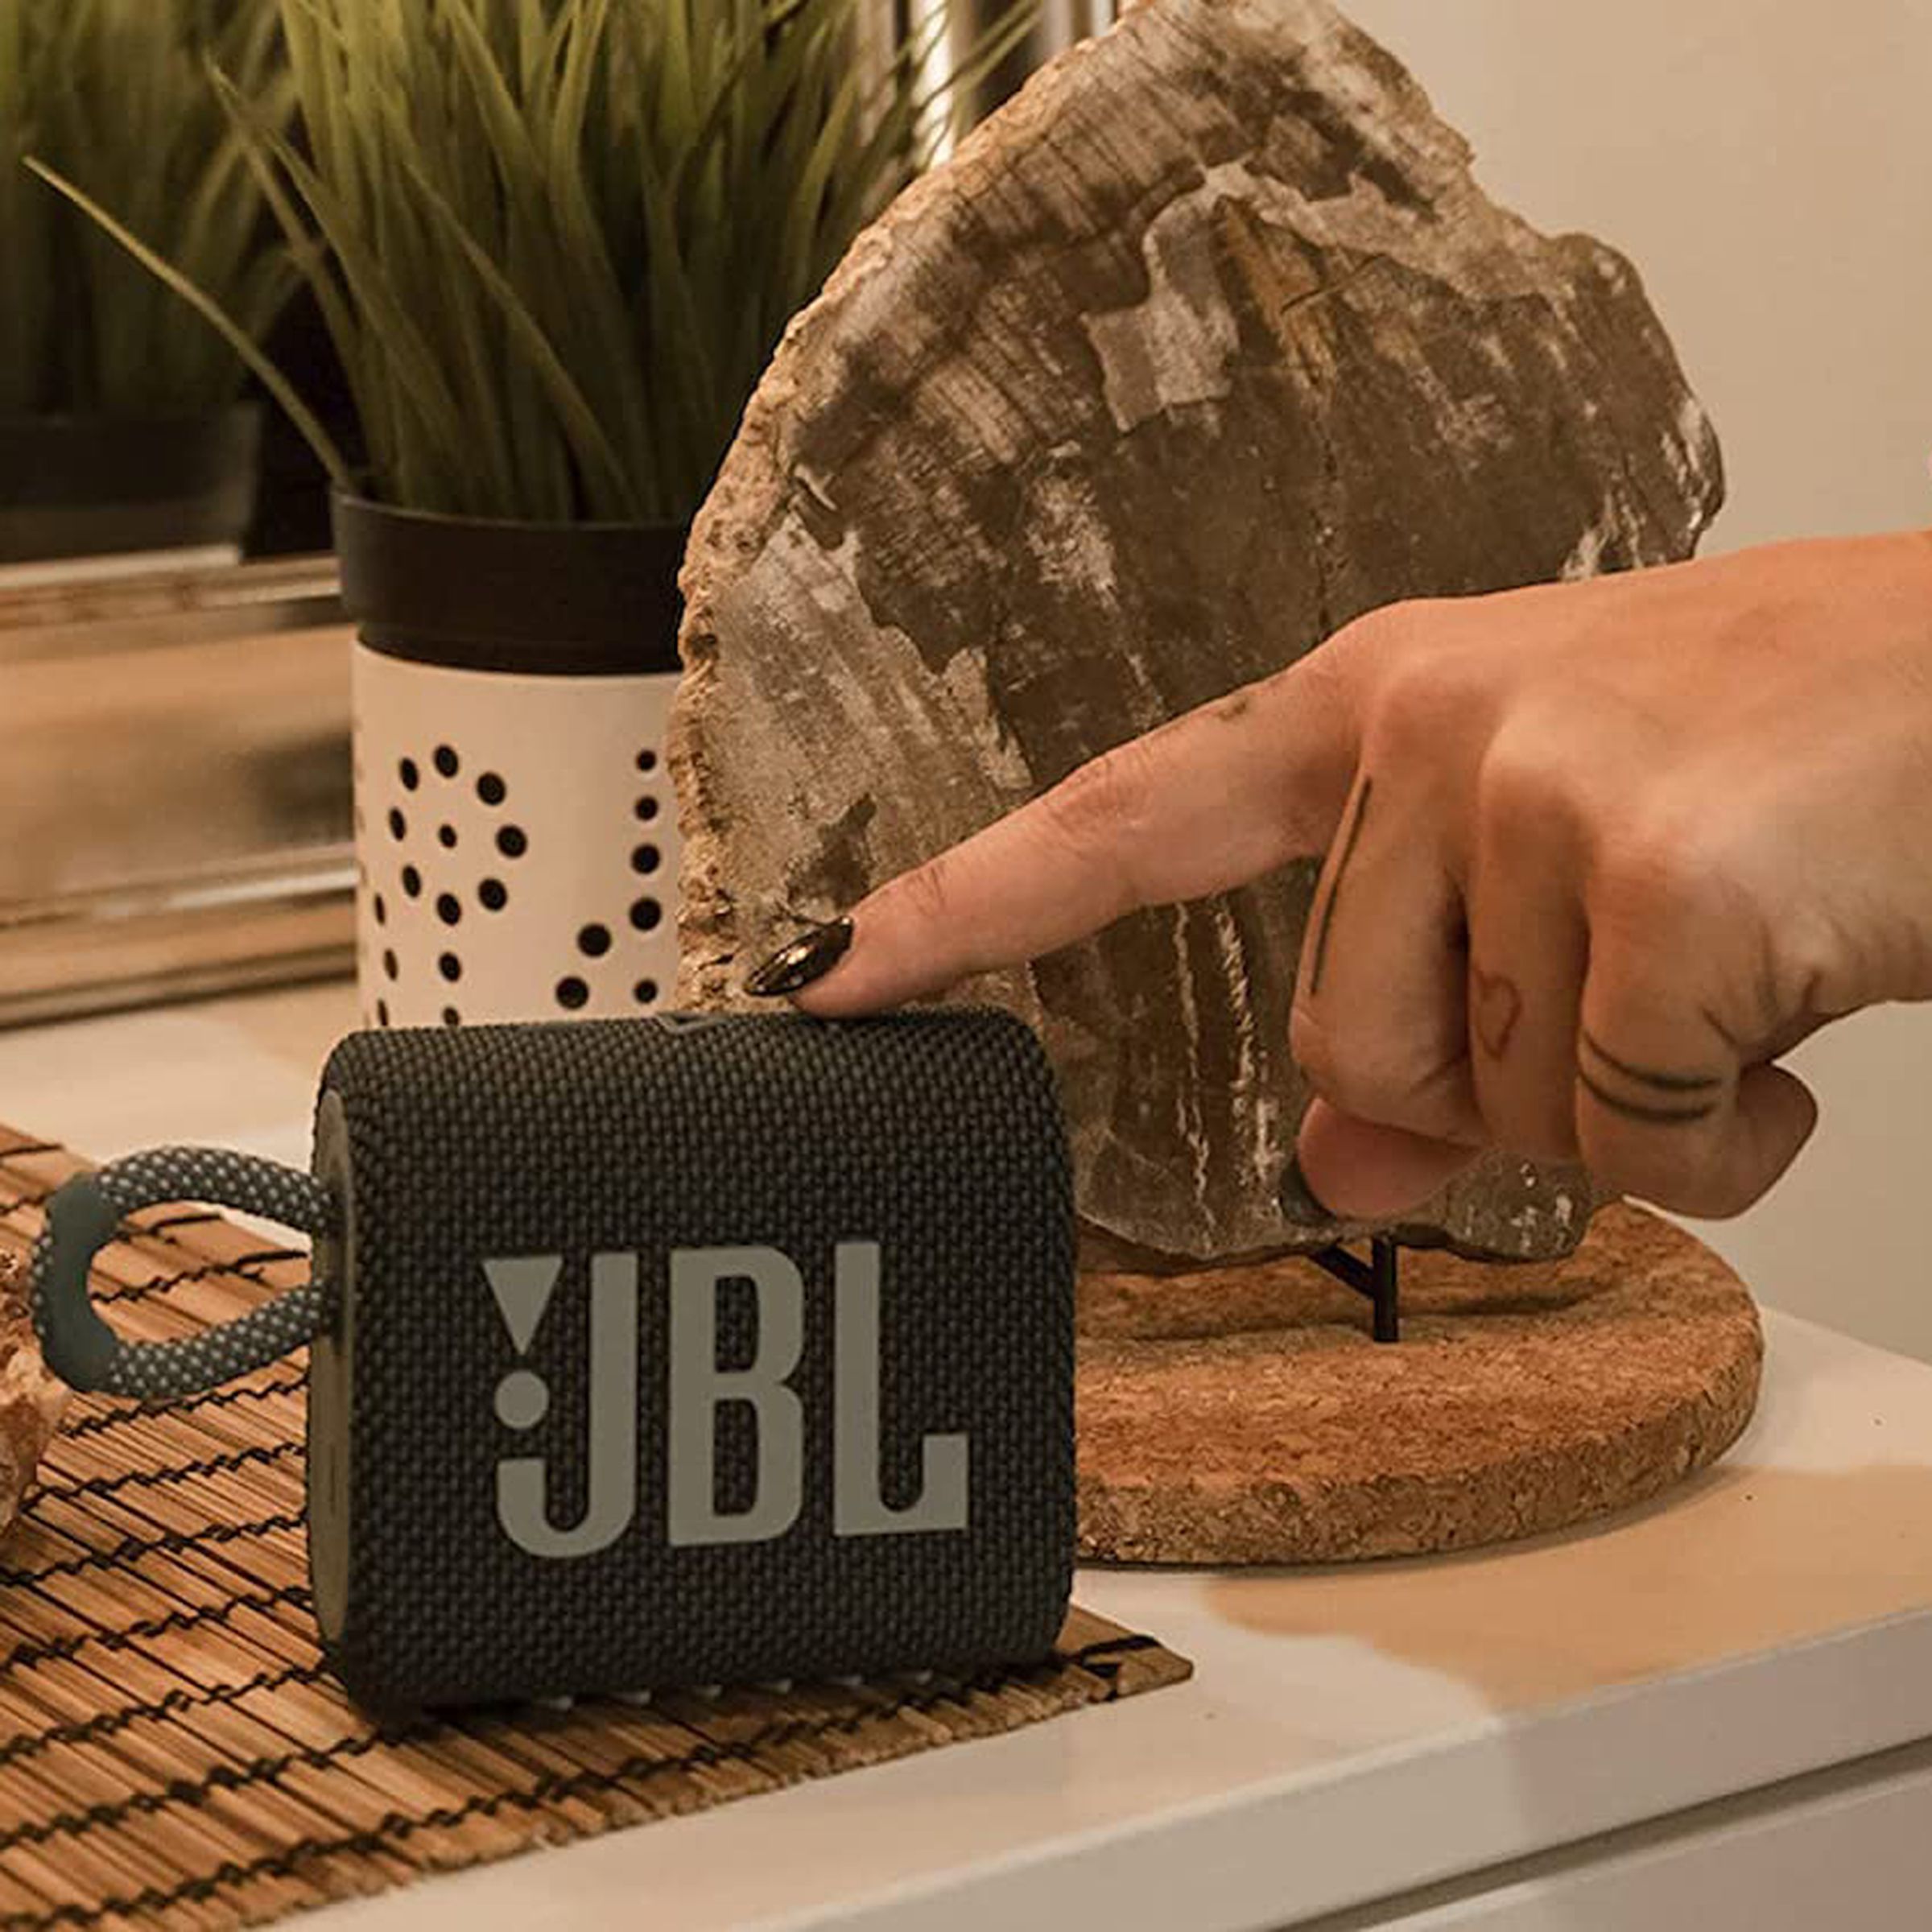 The pocket-sized JBL Go 3 is on sale for just $24.99 right now.